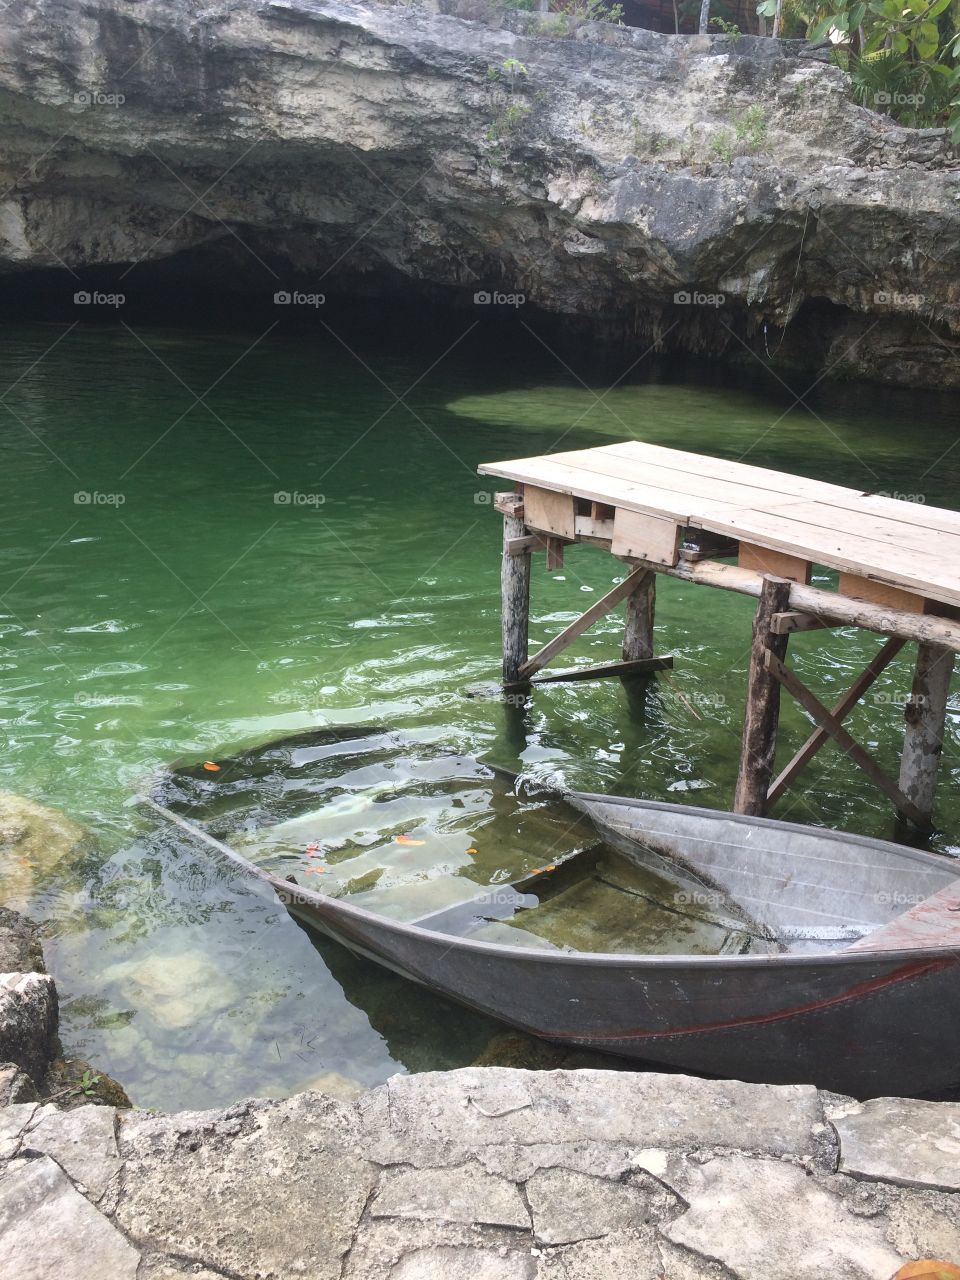 A sunken boat in a cenote in Tulum, Mexico.   A boat who has seen better days but made a great picture.